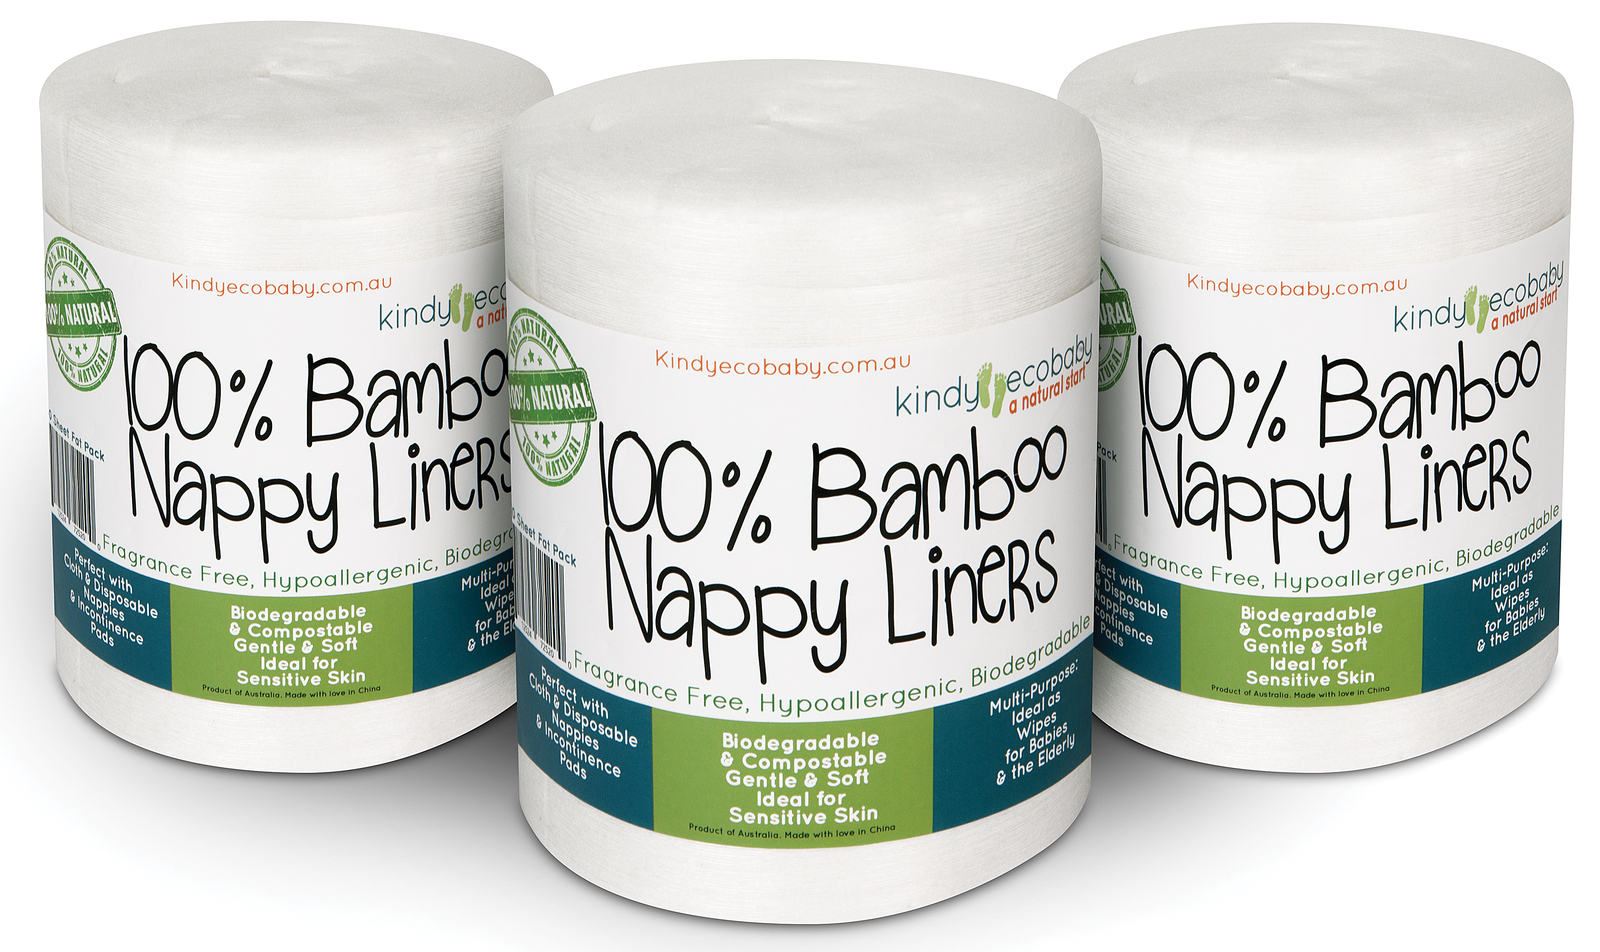 Three bamboo nappy liner rolls in a row from Kindy Ecobaby against a white background